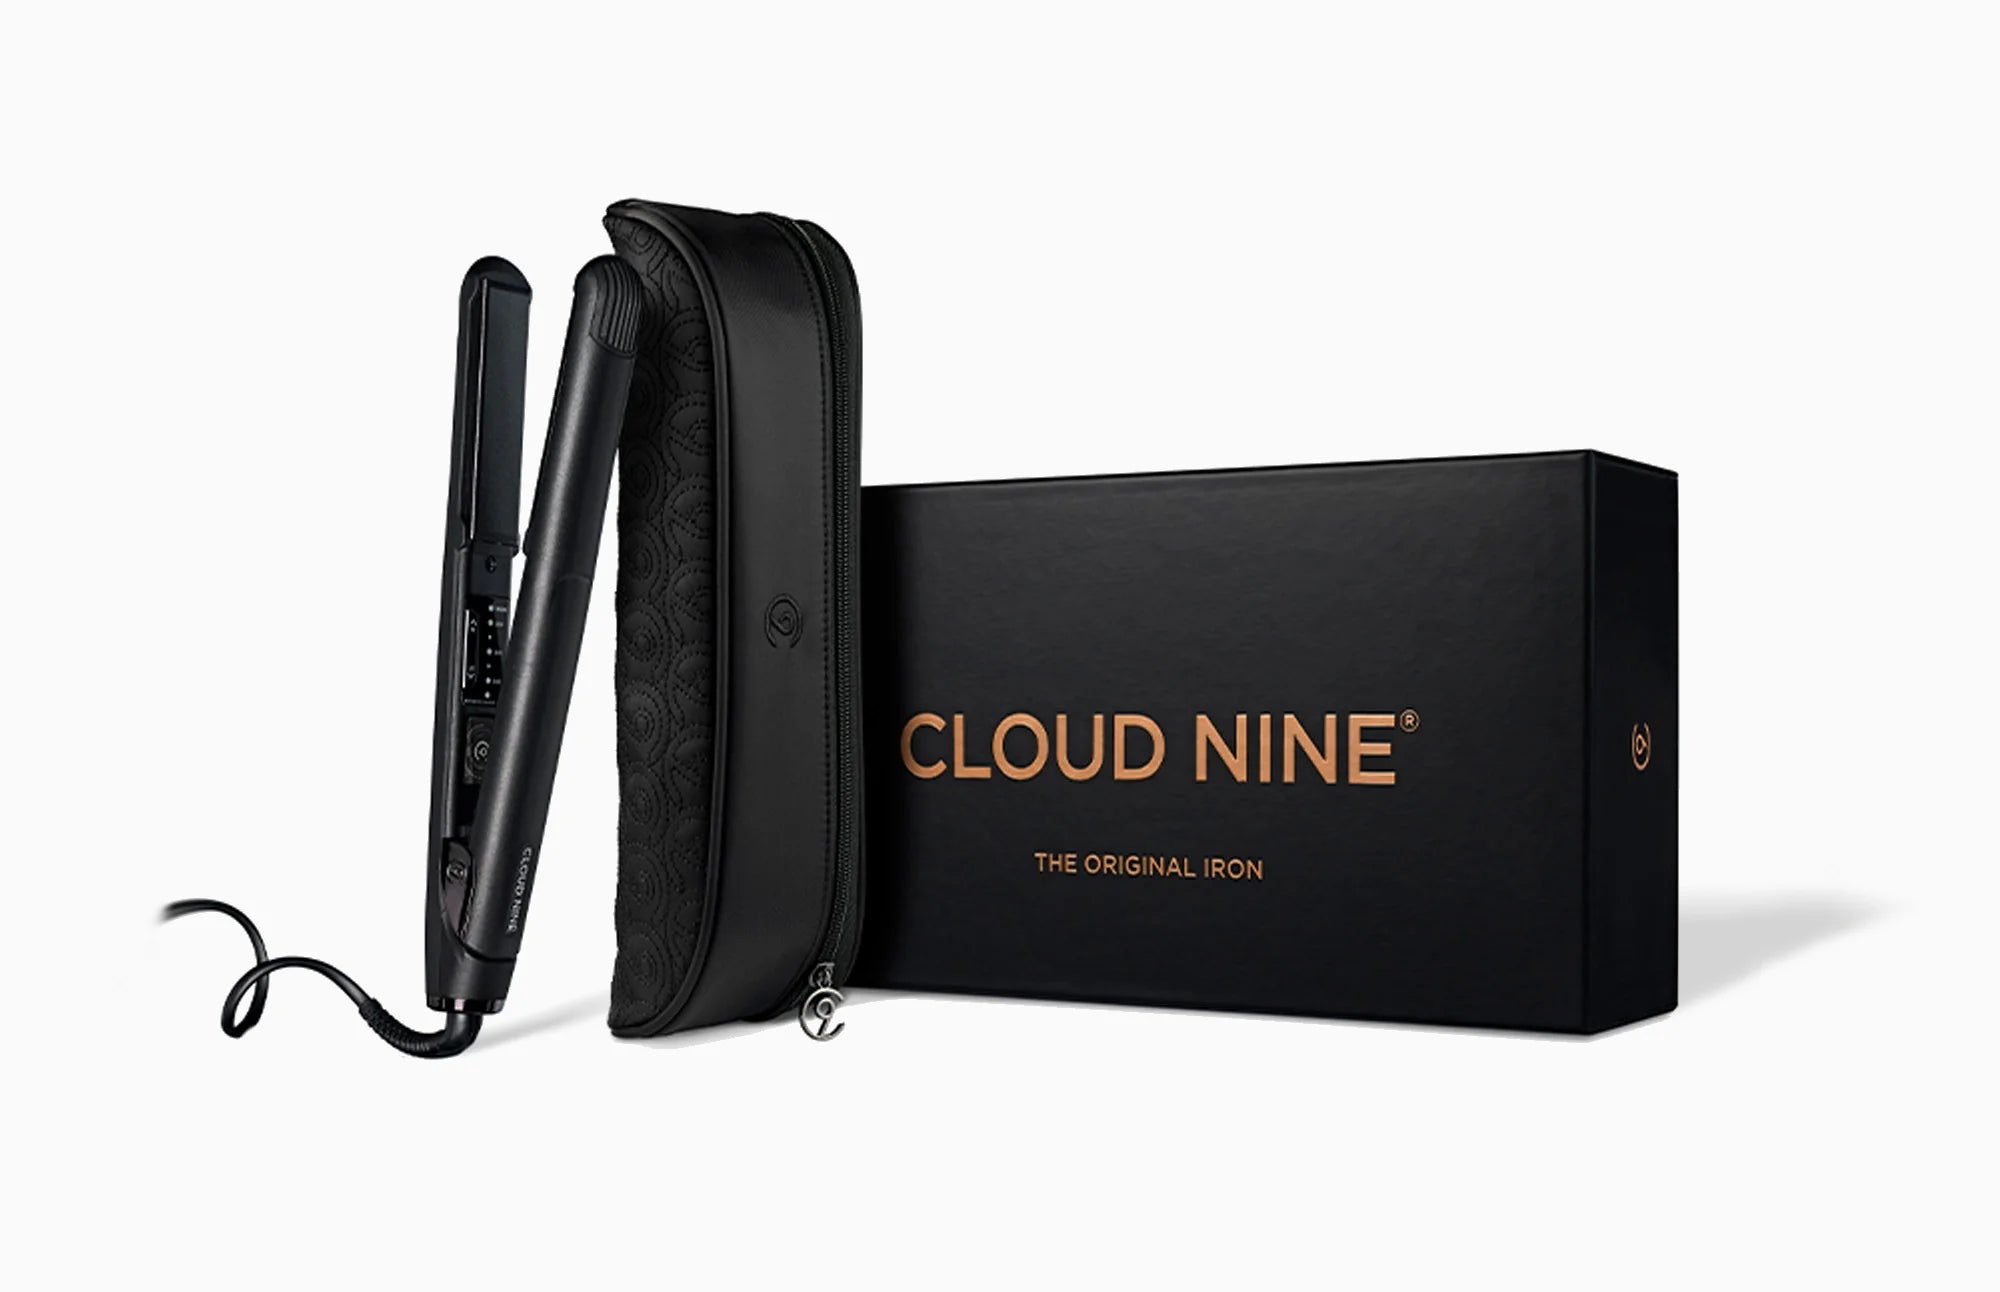 The CLOUD NINE Original Iron and styling case leaning on the black packaging box.